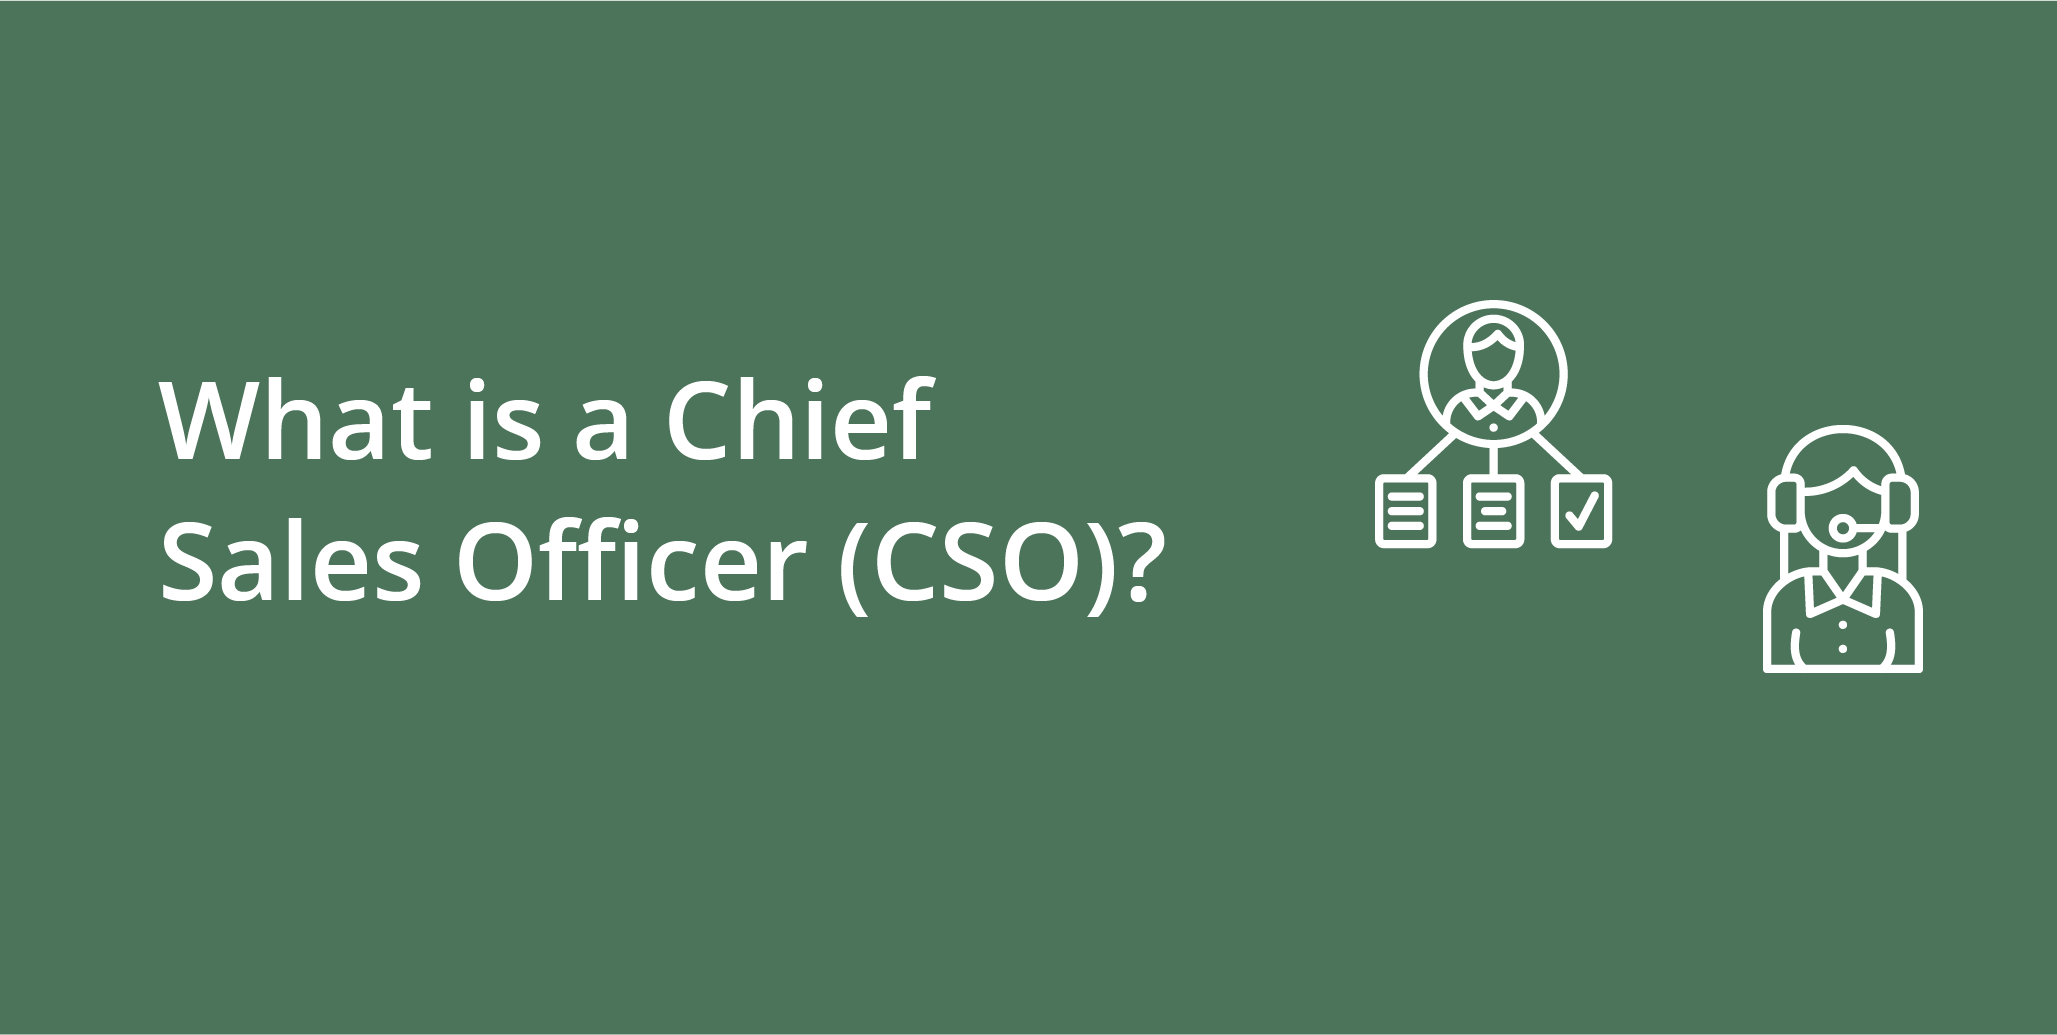 Chief Sales Officer (CSO)